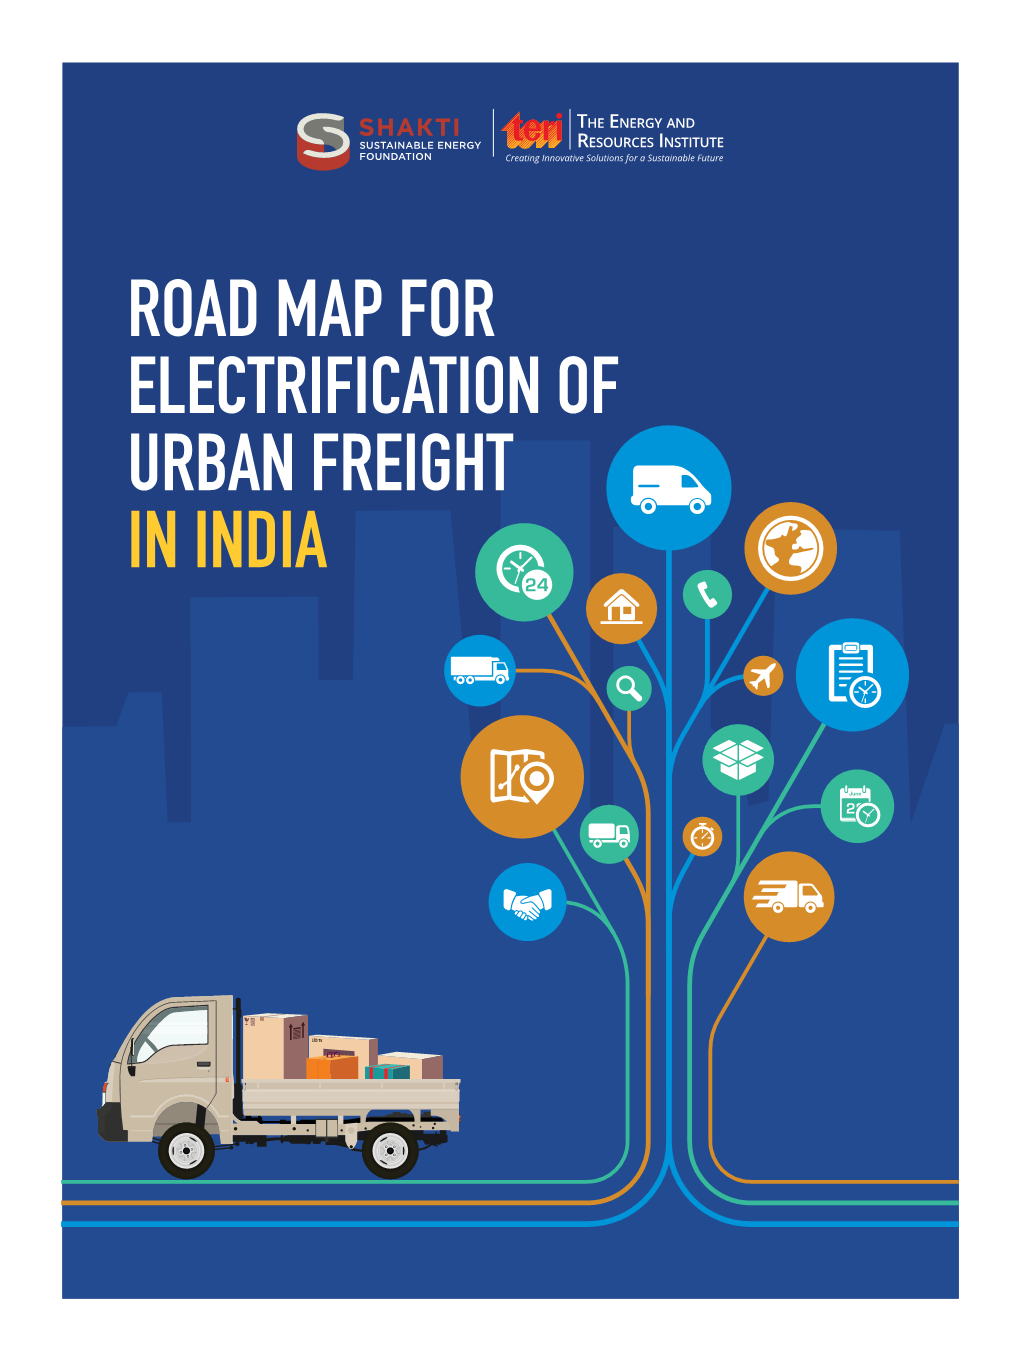 Road Map for Electrification of Urban Freight